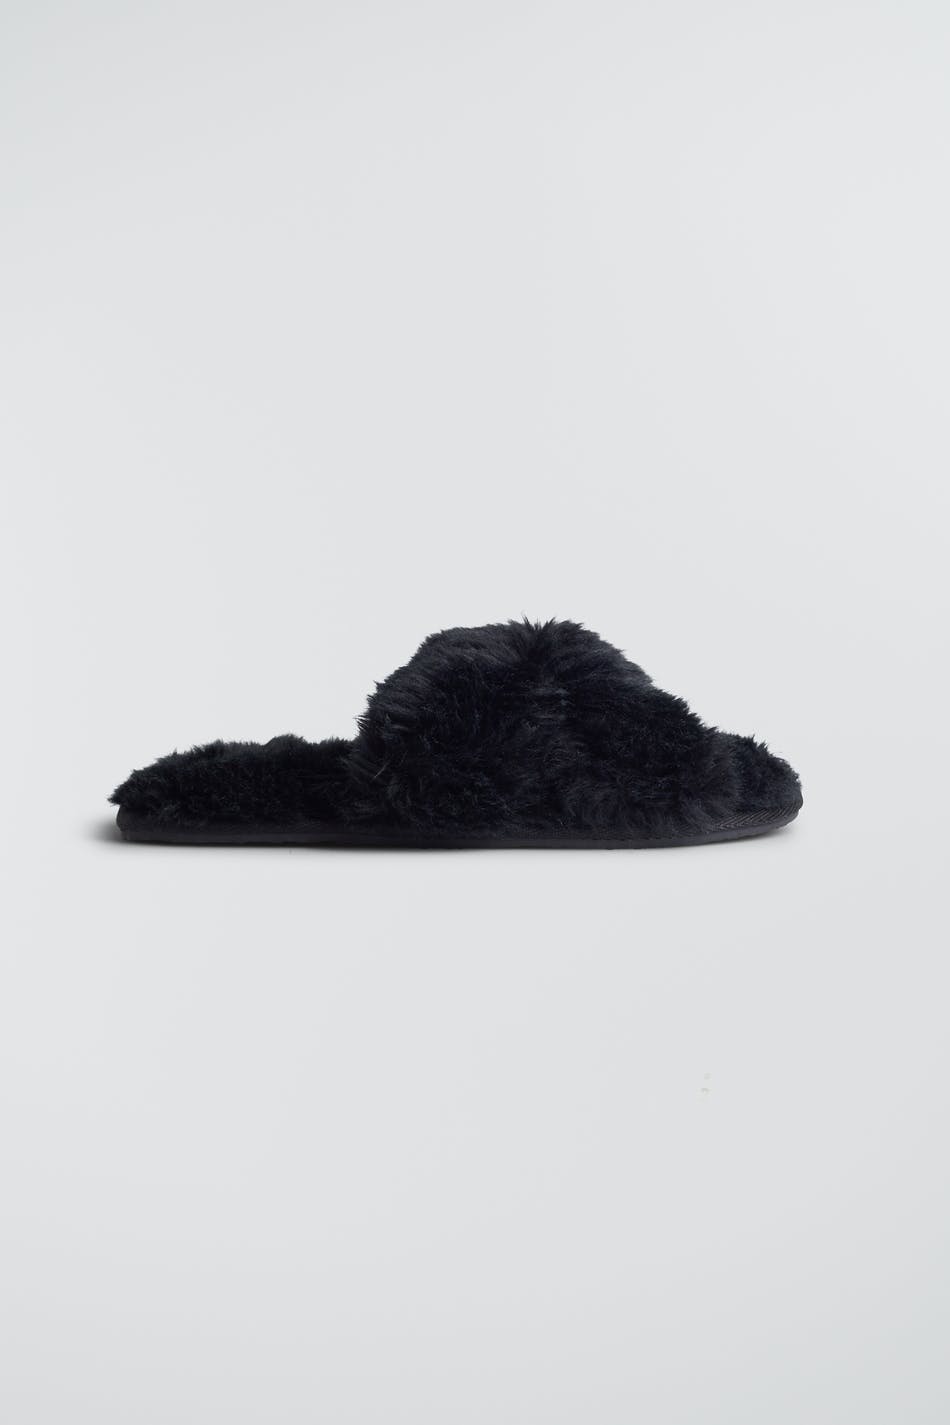 Gina Tricot Faux fur slippers 38/39  Black (9000)